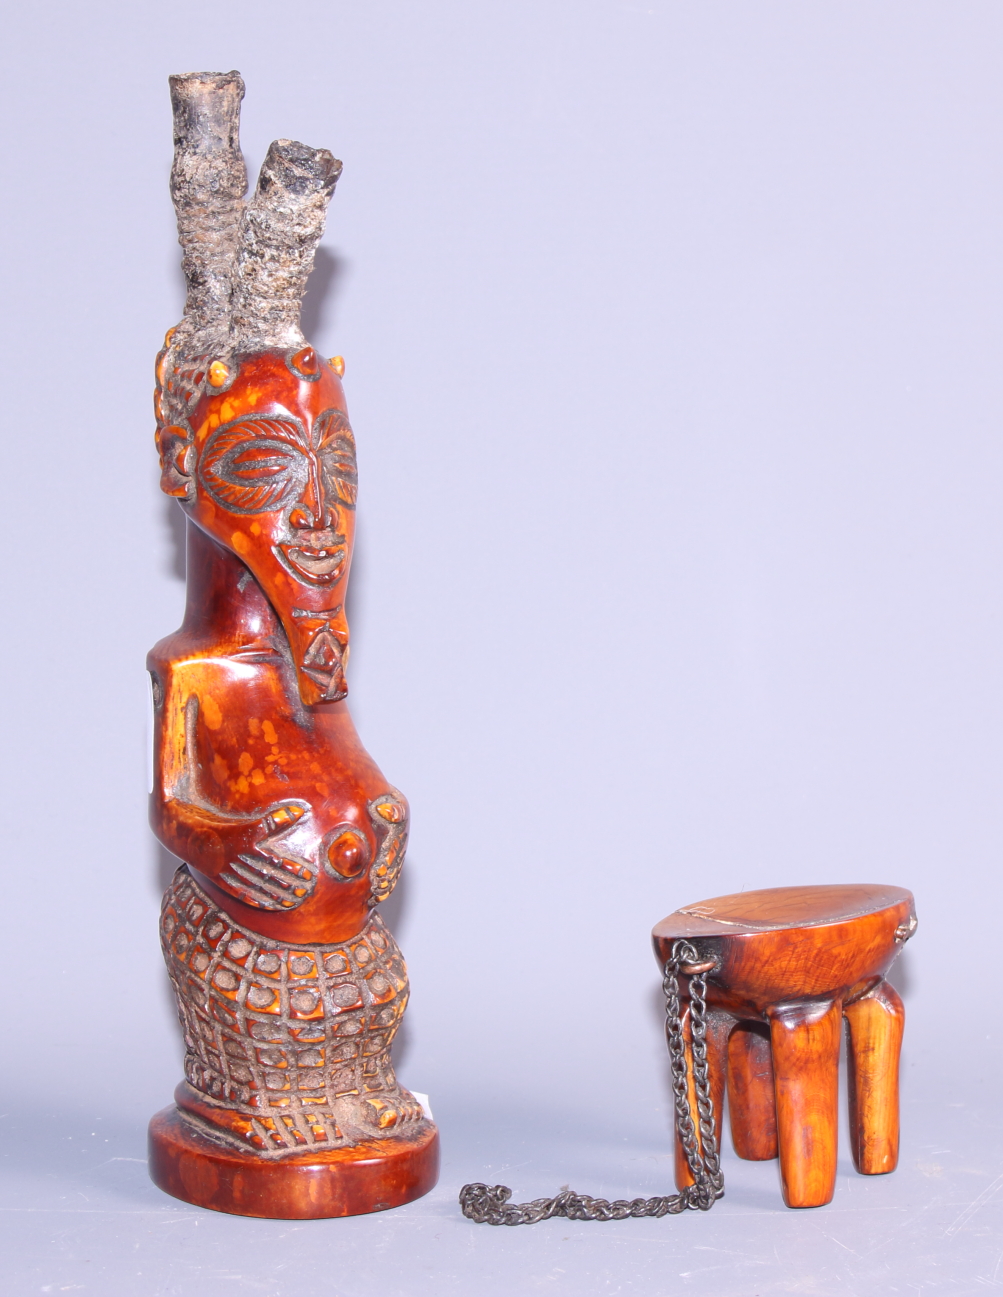 A carved ivory pipe, formed as figure of a standing man, 7 1/2" high, and an ivory four legged stool